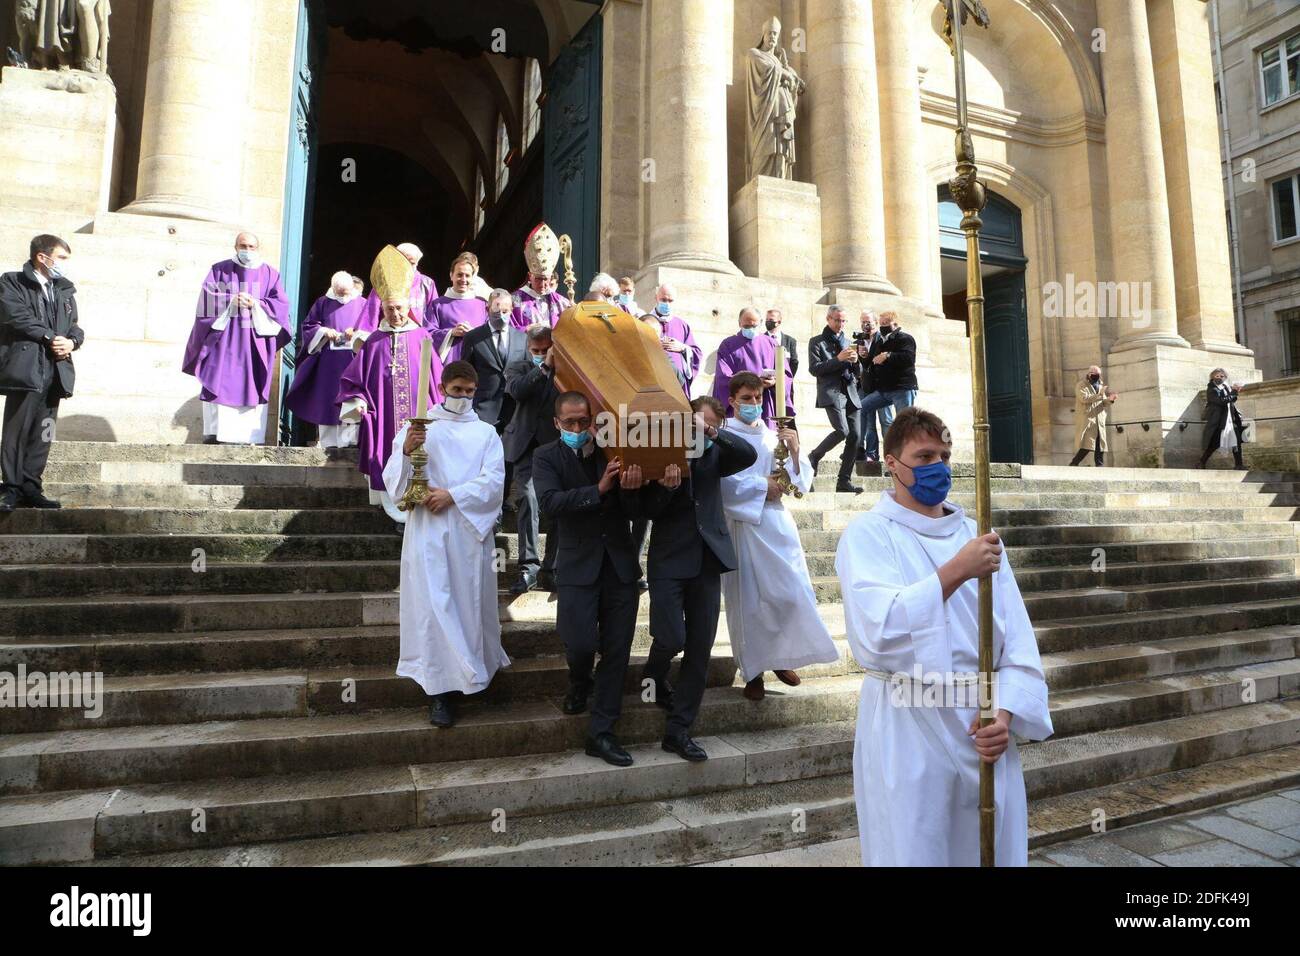 The coffin during the funeral ceremony of British-French actor Michael Lonsdale at Saint Roch church in Paris, France on October 1st 2020. He died in Paris on 21 September 2020, aged 89. He was best known to many as Hugo Drax in “Moonraker.” But he also worked with many directors including Truffaut, Spielberg and Marguerite Duras. Photo by Nasser Berzane/ABACAPRESS.COM Stock Photo